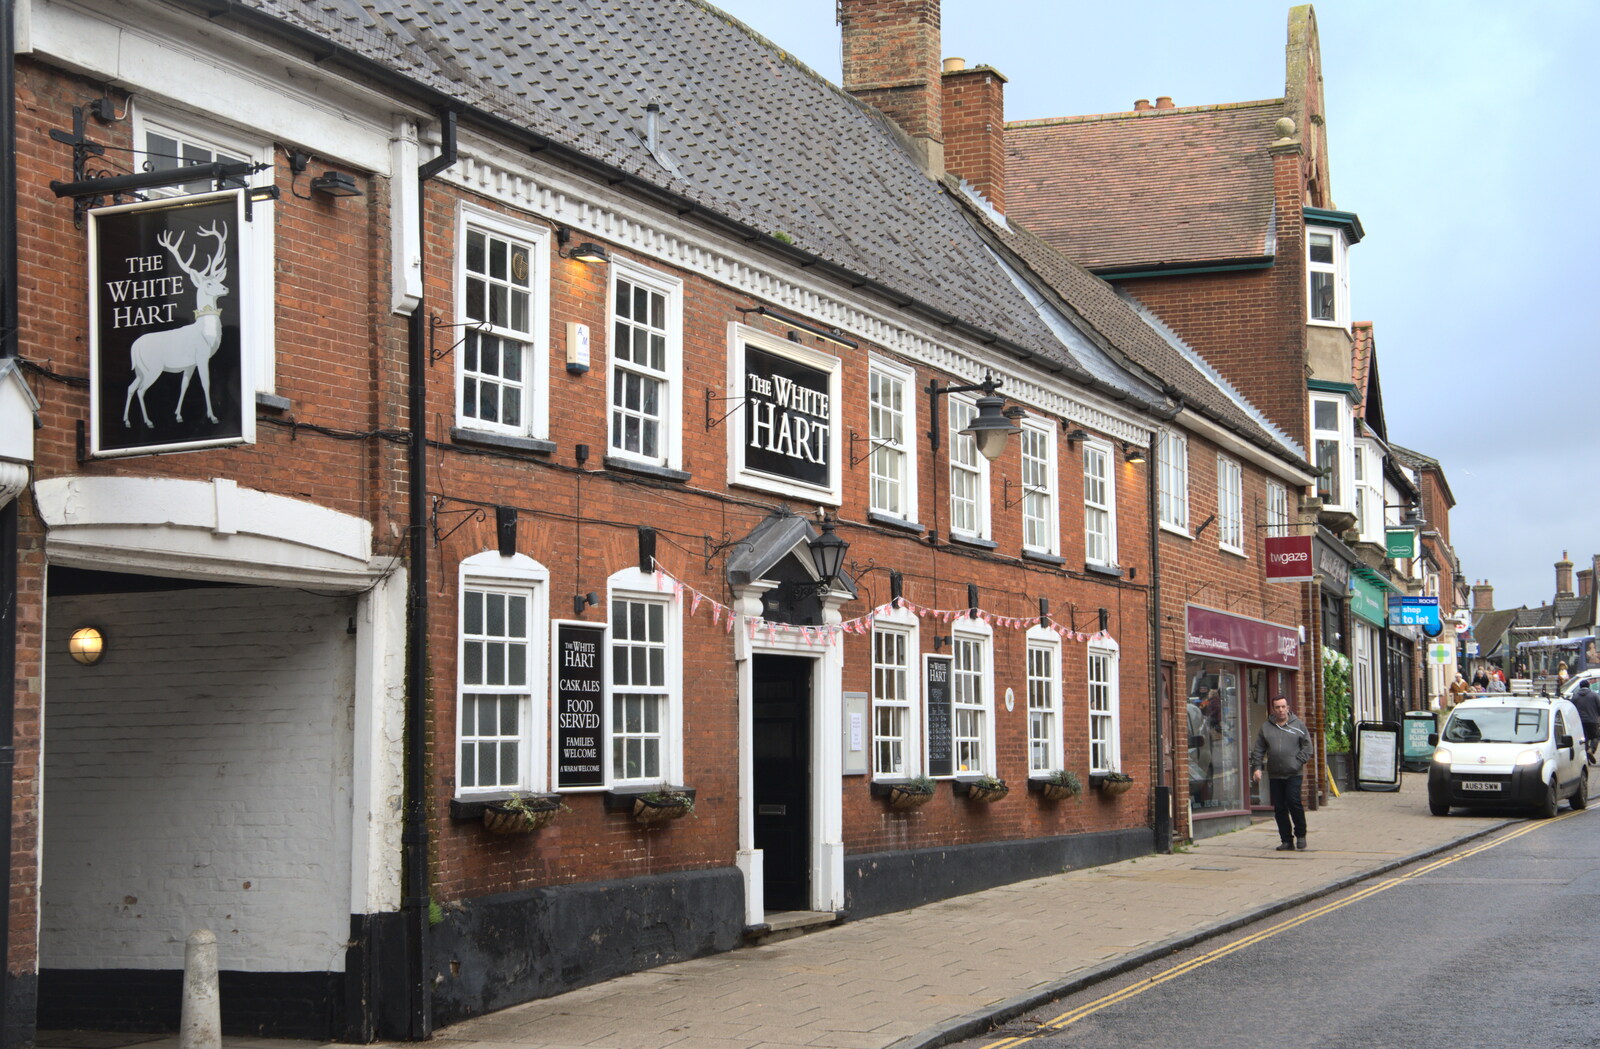 One of several pub/hotels - the White Hart from A Postcard from Wymondham, Norfolk - 26th January 2023